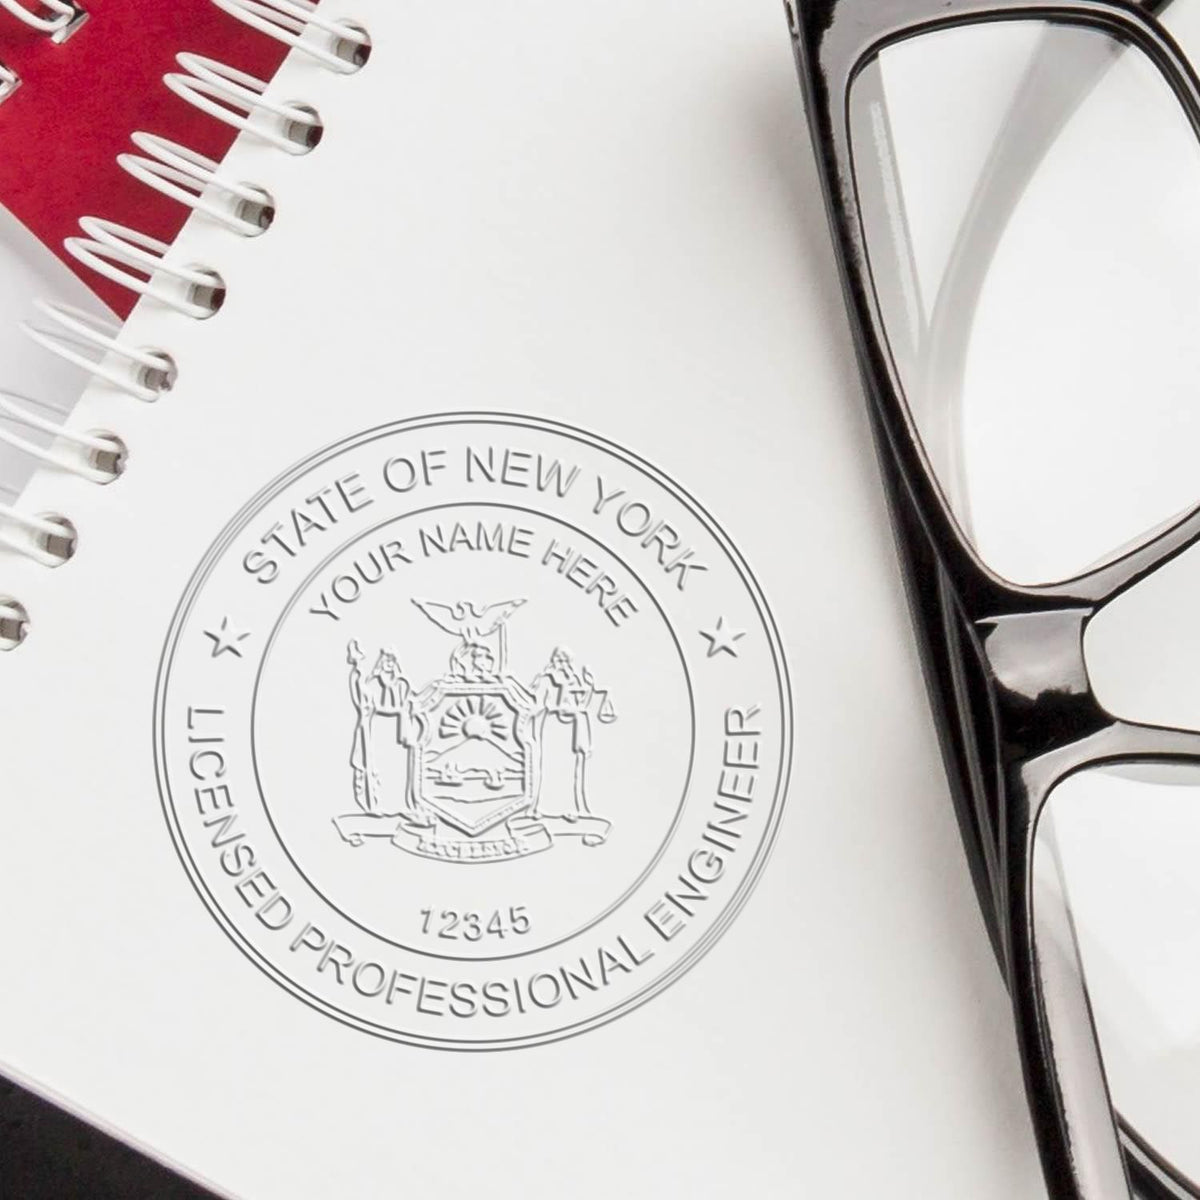 The Gift New York Engineer Seal stamp impression comes to life with a crisp, detailed image stamped on paper - showcasing true professional quality.